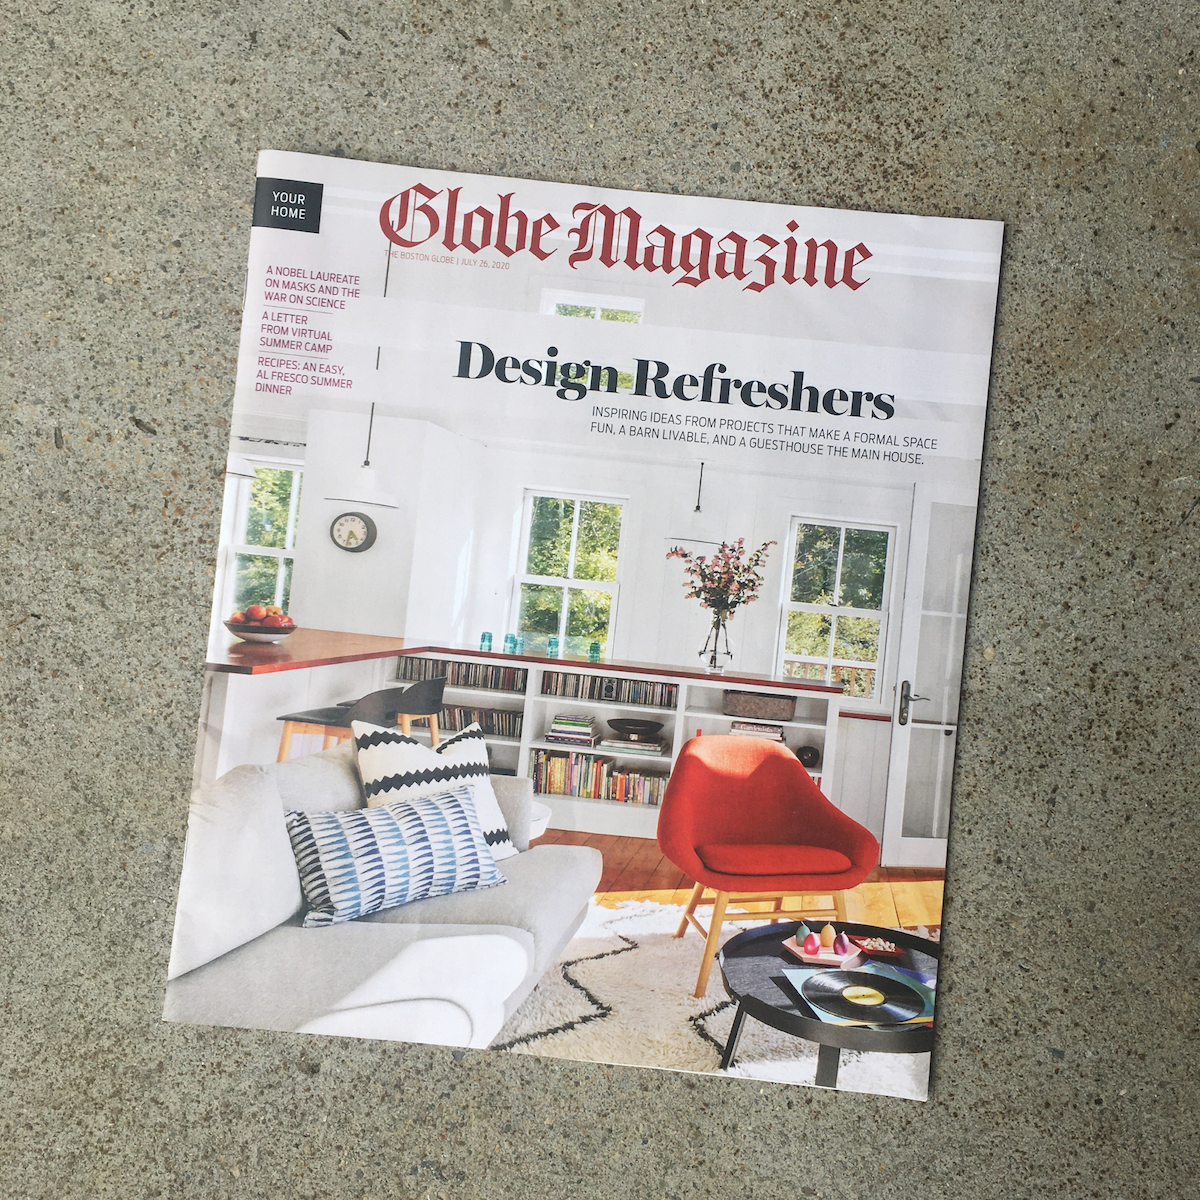 Boston Globe Magazine Cover of the Issue Featuring Provincetown Modern Renovation